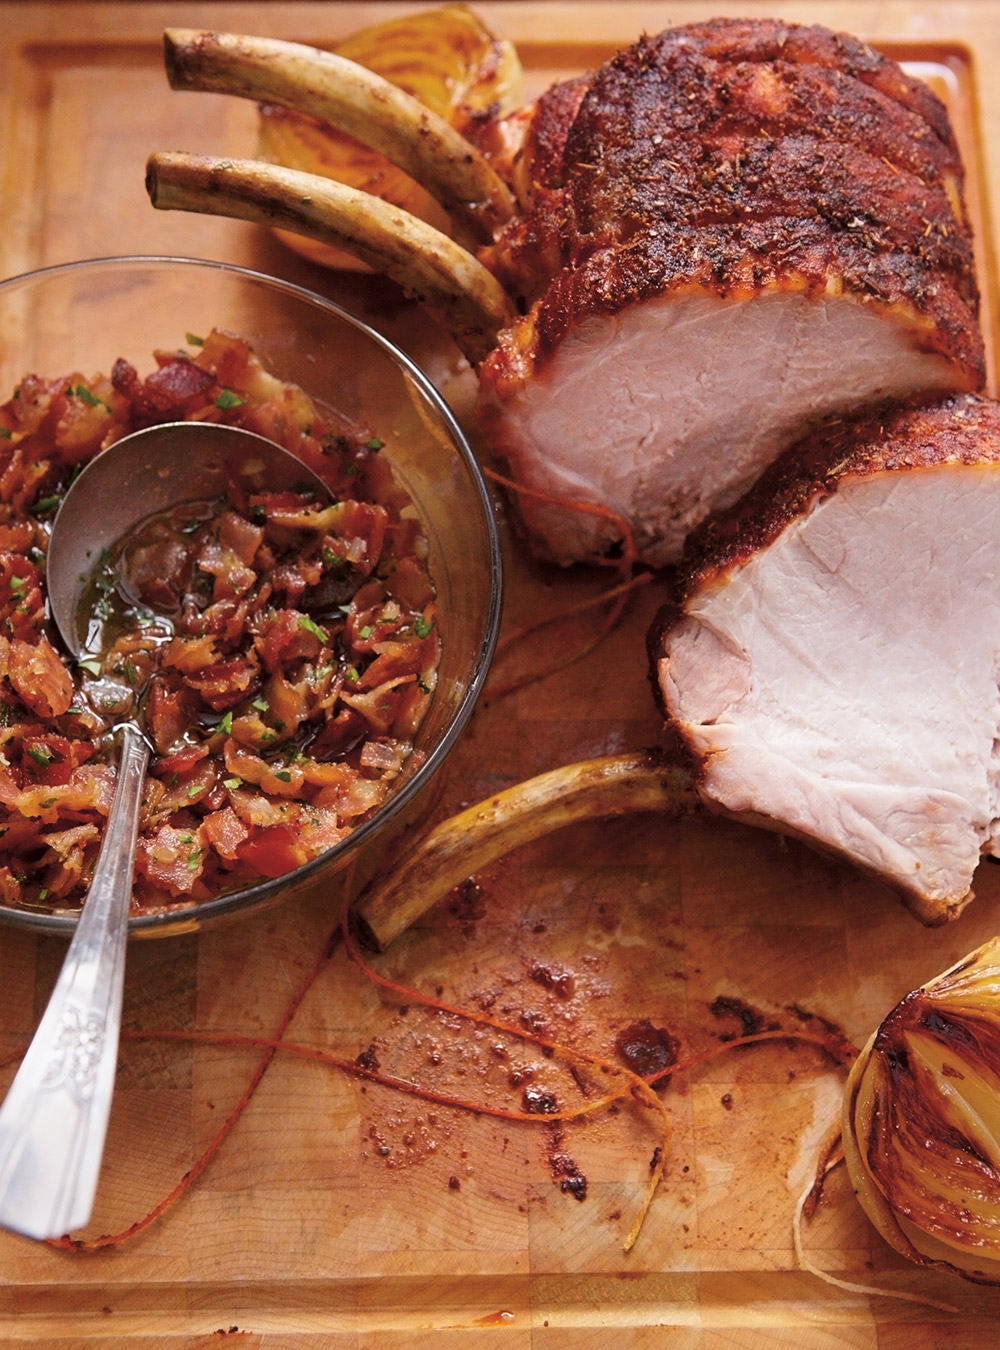 Roasted Pork Loin with a Warm Bacon Dressing